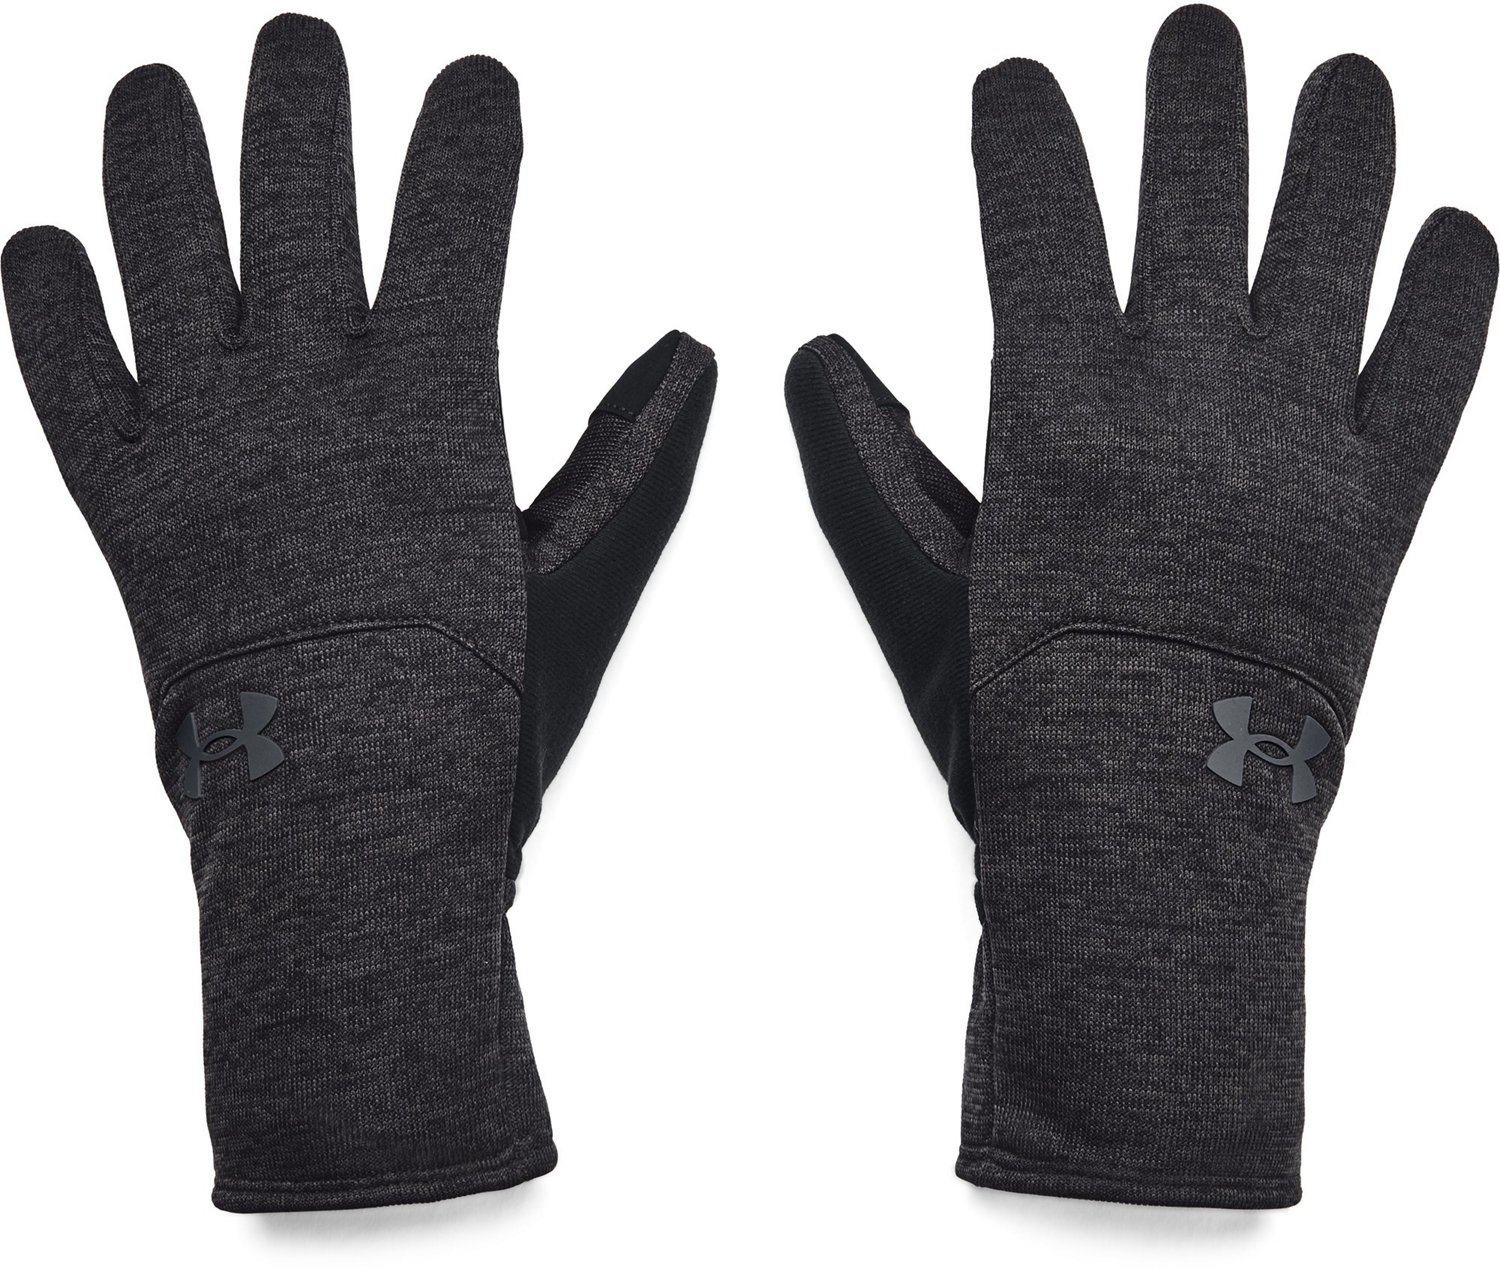 Under Armour Men’s Storm Fleece Gloves | Free Shipping at Academy